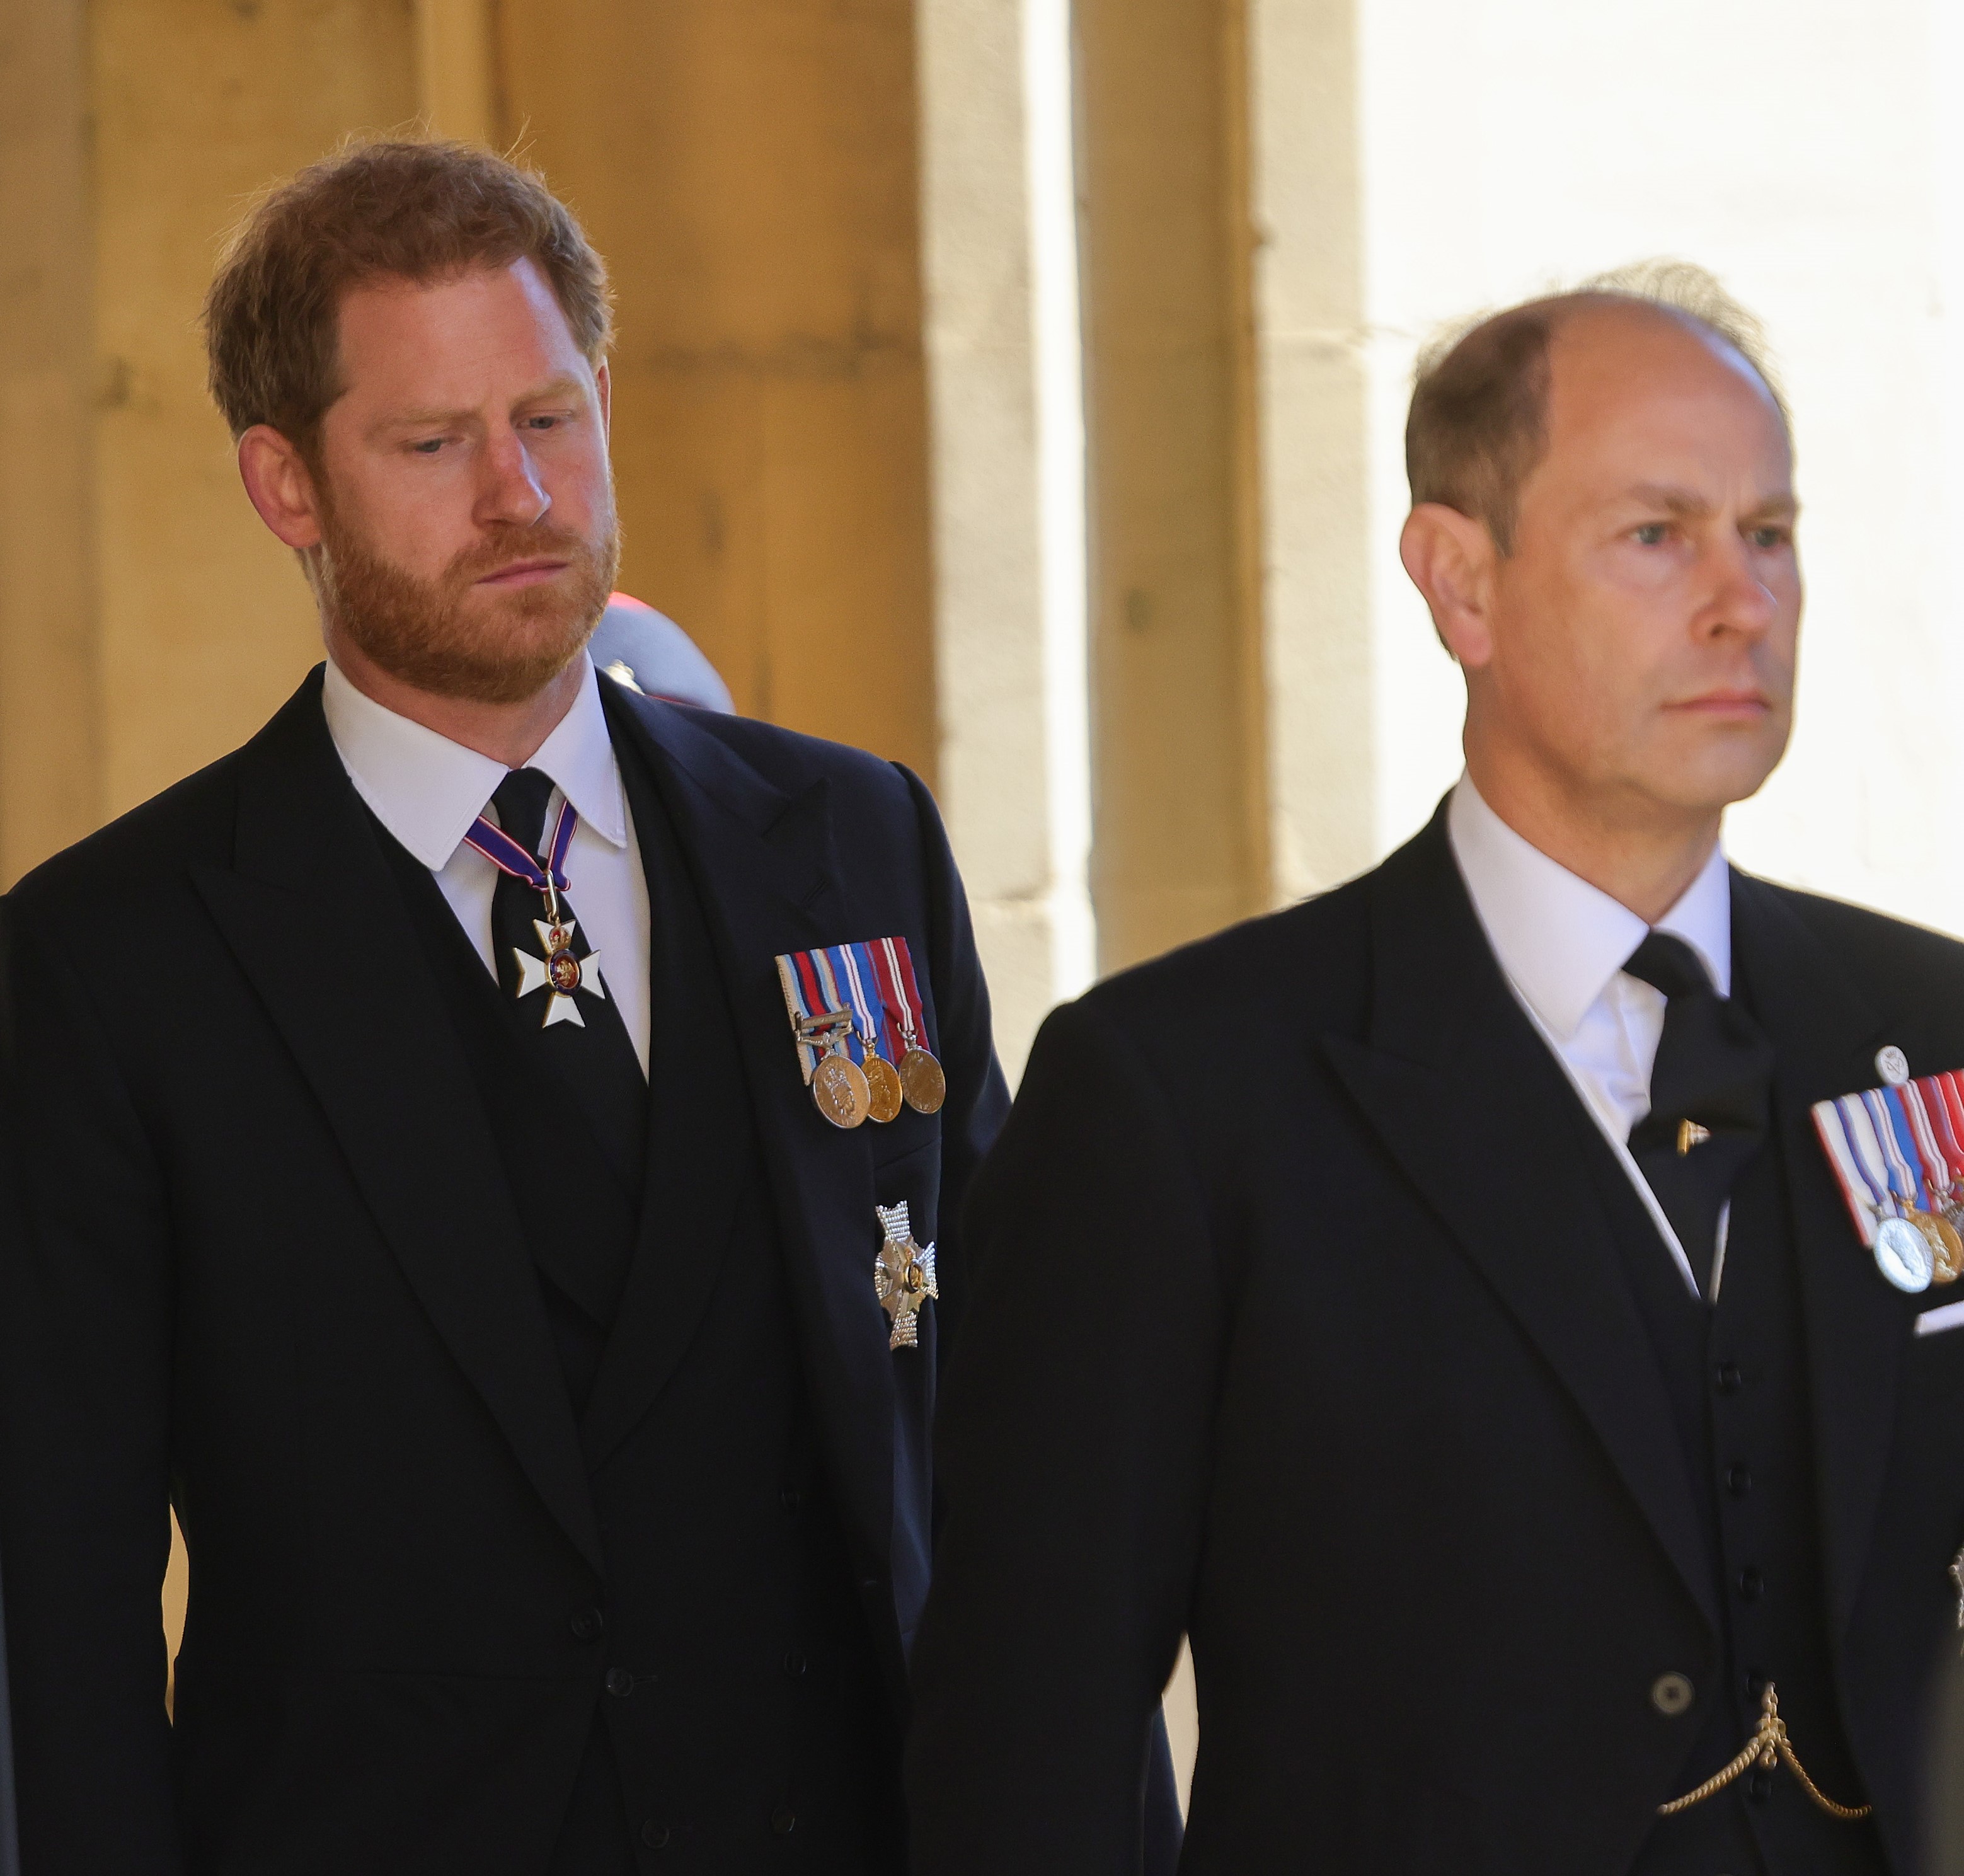 Prince Harry and Prince Edward at the funeral of Prince Philip on April 17, 2021